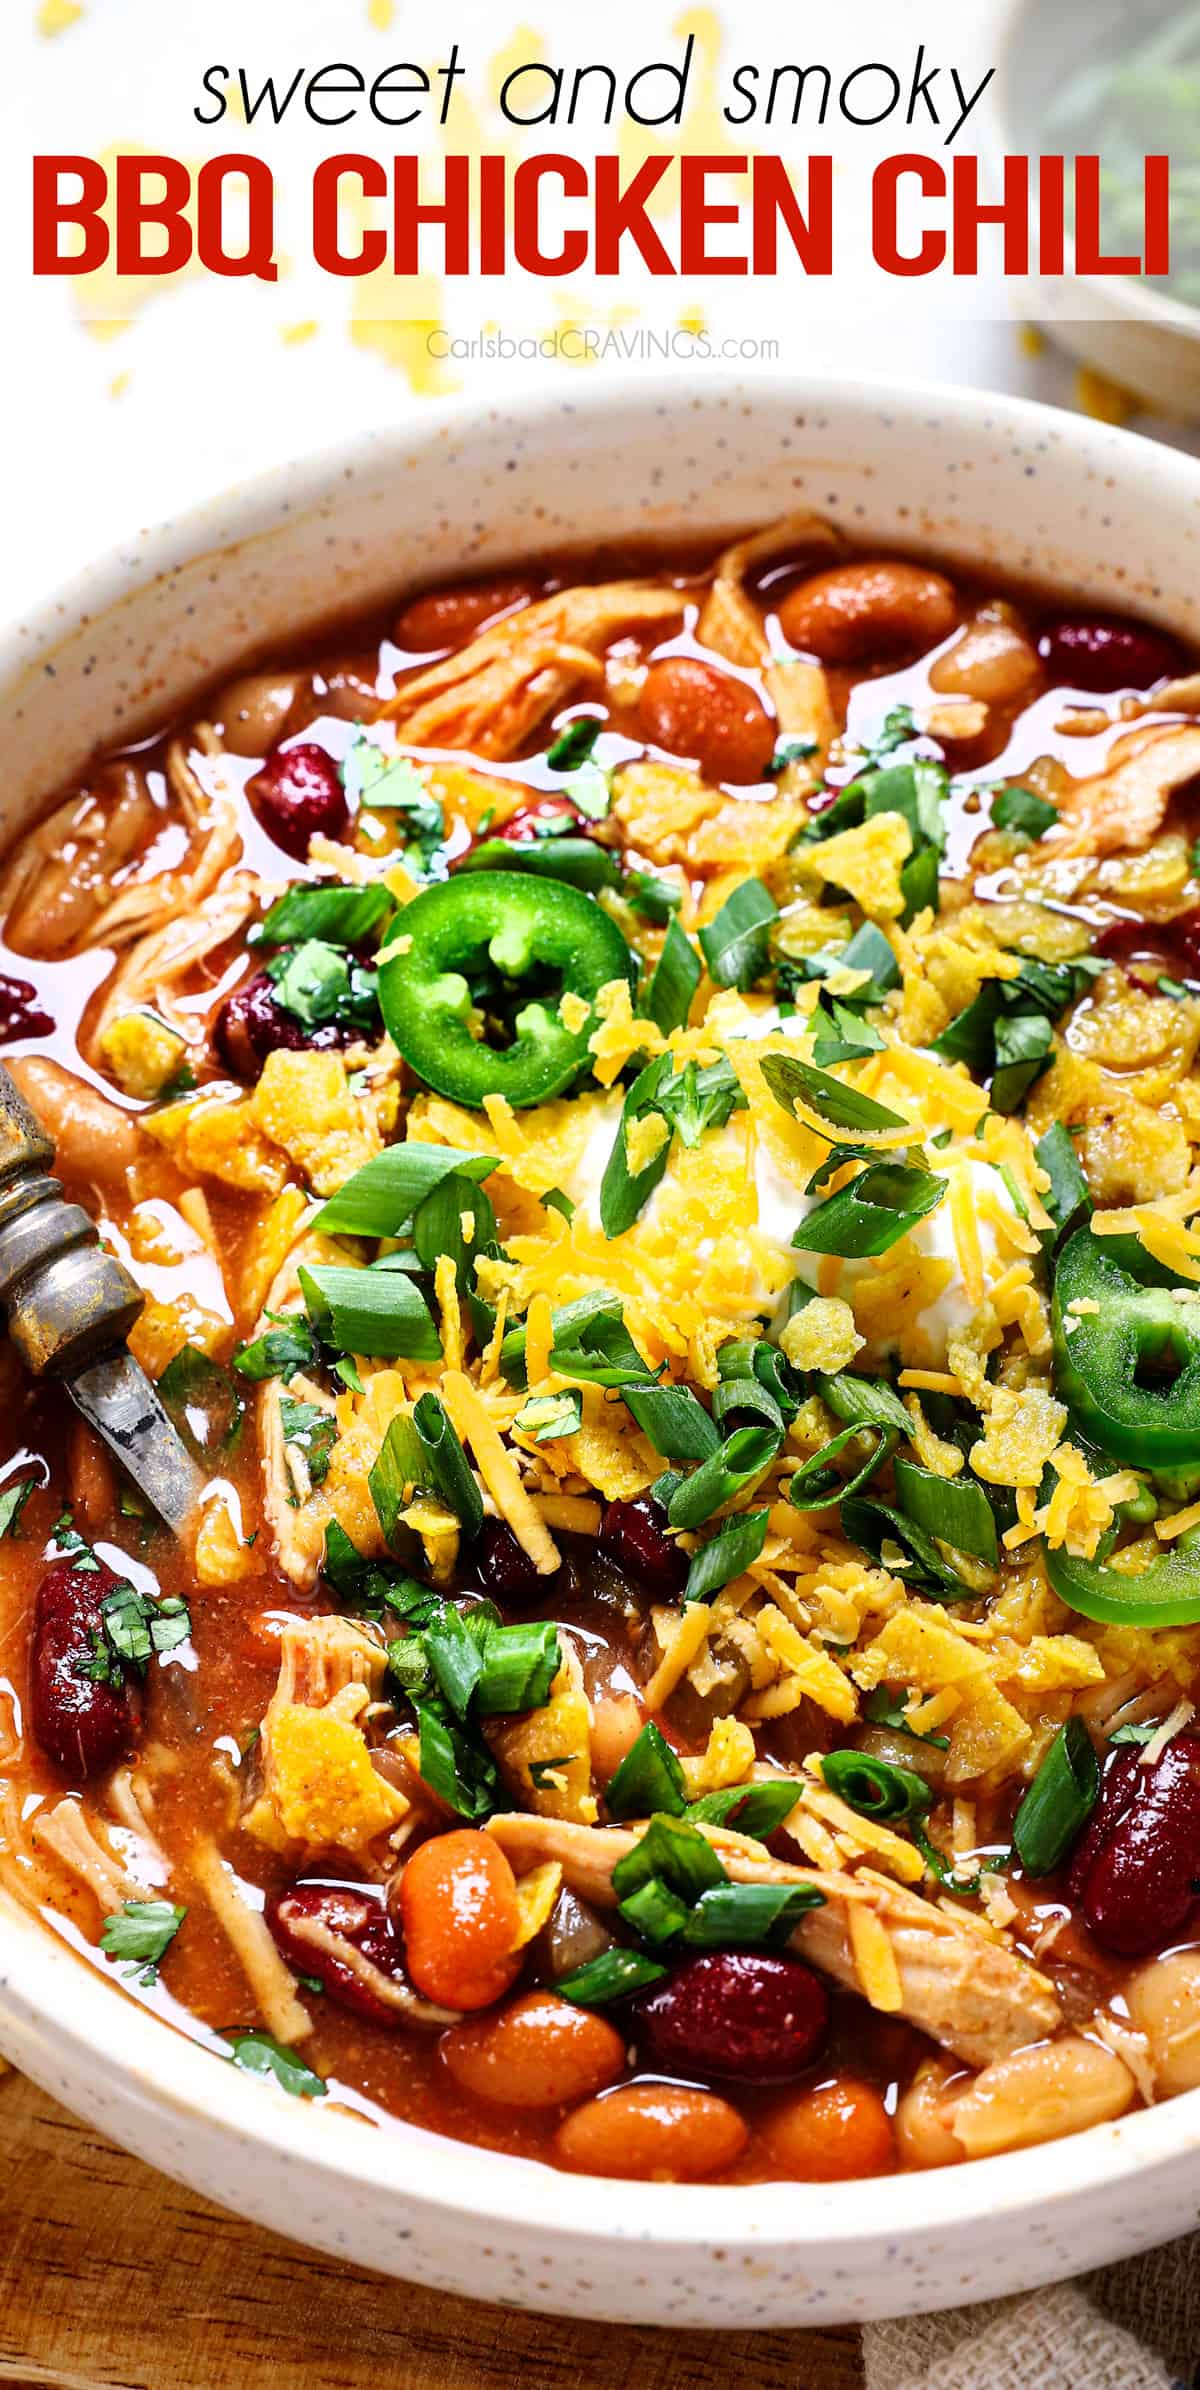 slow cooker chicken chili being served in a bowl with sour cream, tortilla chips, green onions and cheese